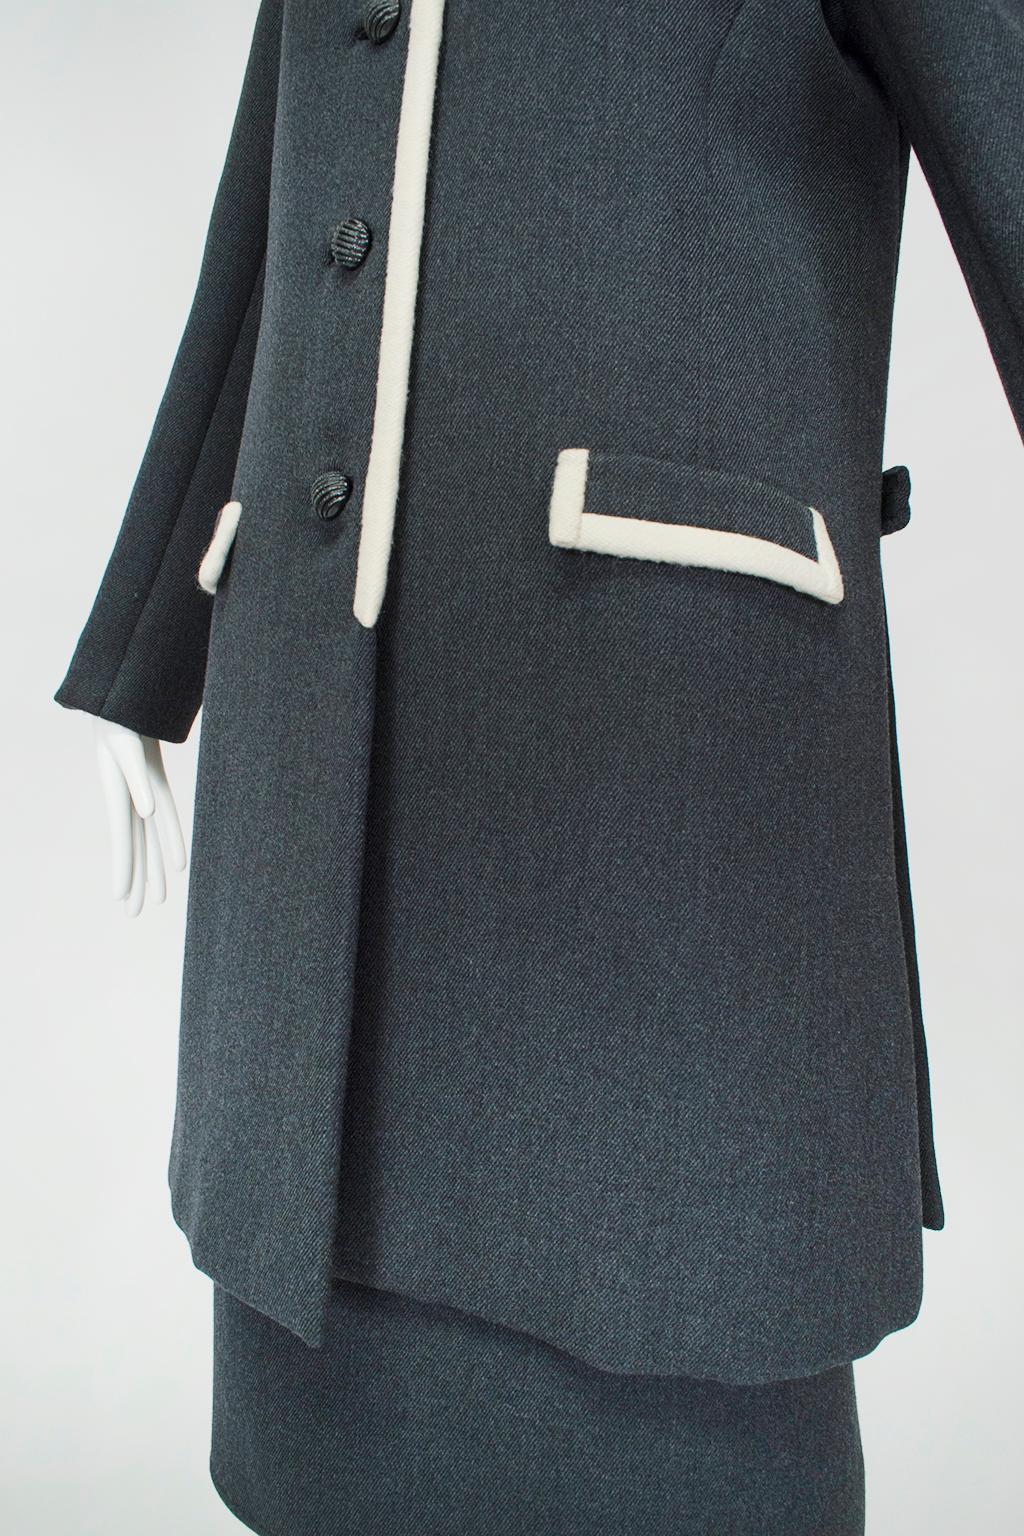 Women's B Zuckerman Mod Jackie O Charcoal Wool Contrast Coat and Skirt Set - M-L, 1960s For Sale